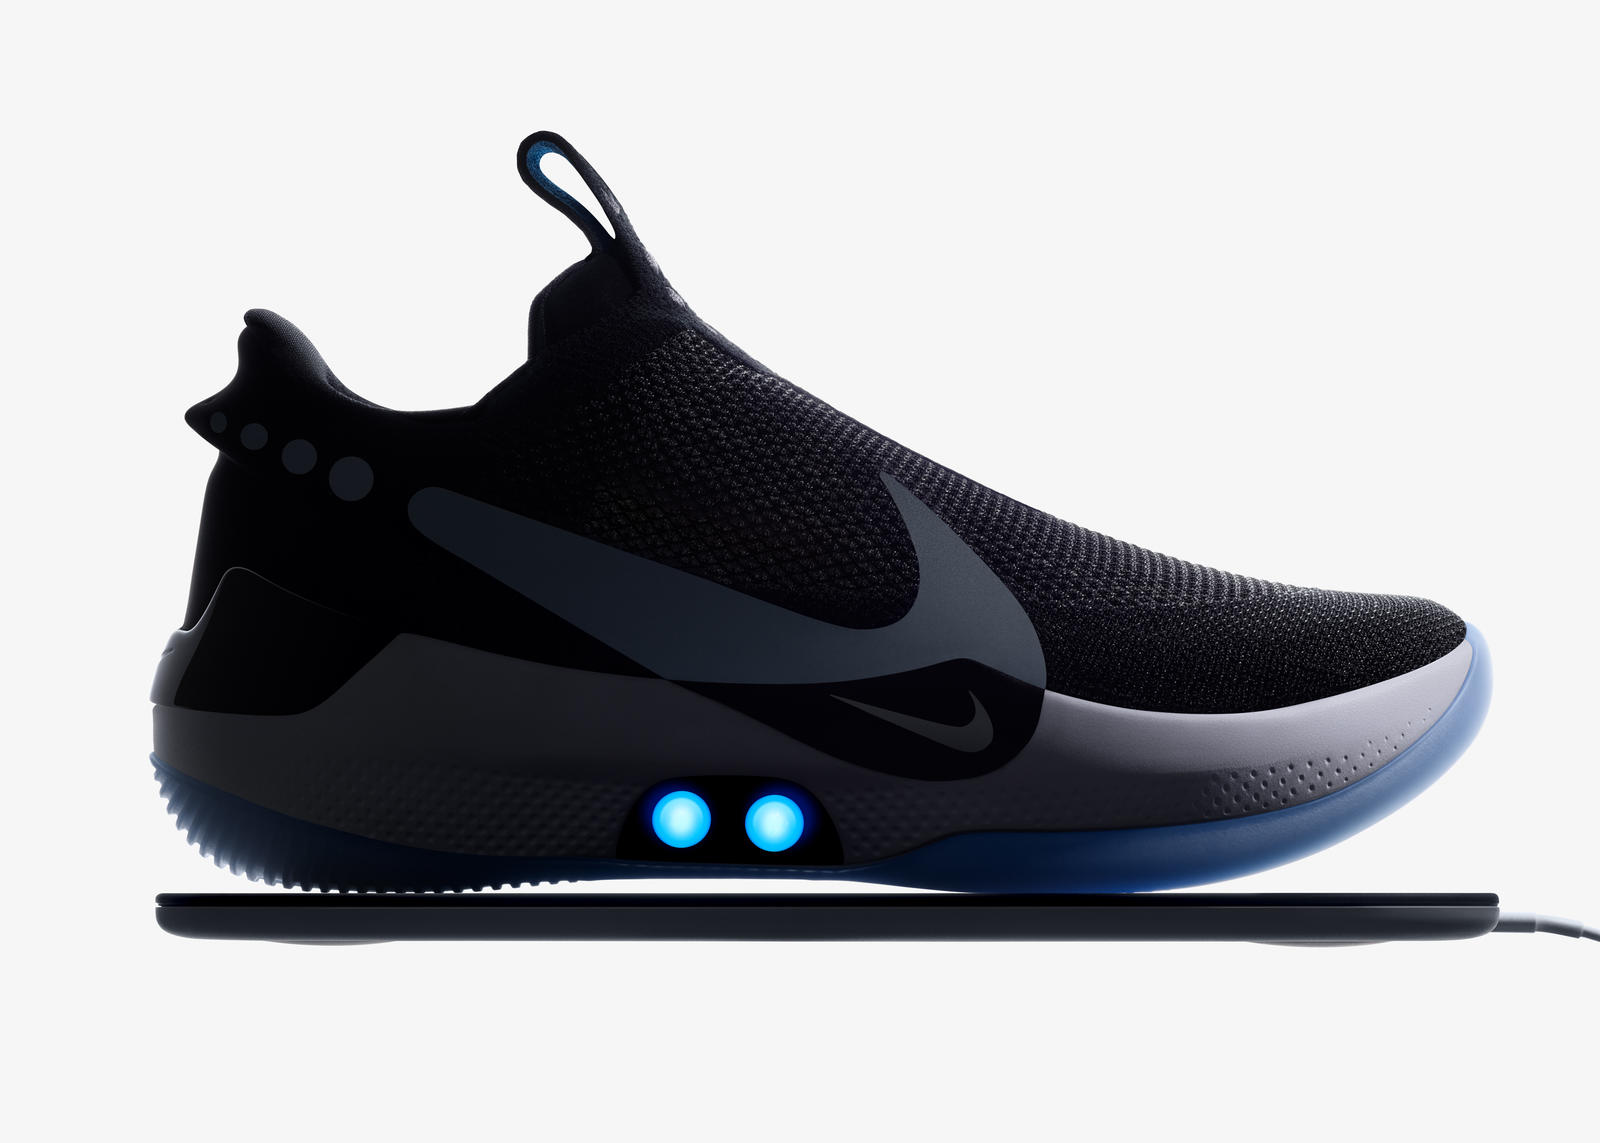 Aircharge | Nike launches Nike Adapt BB, first shoe with wireless charging capabilities